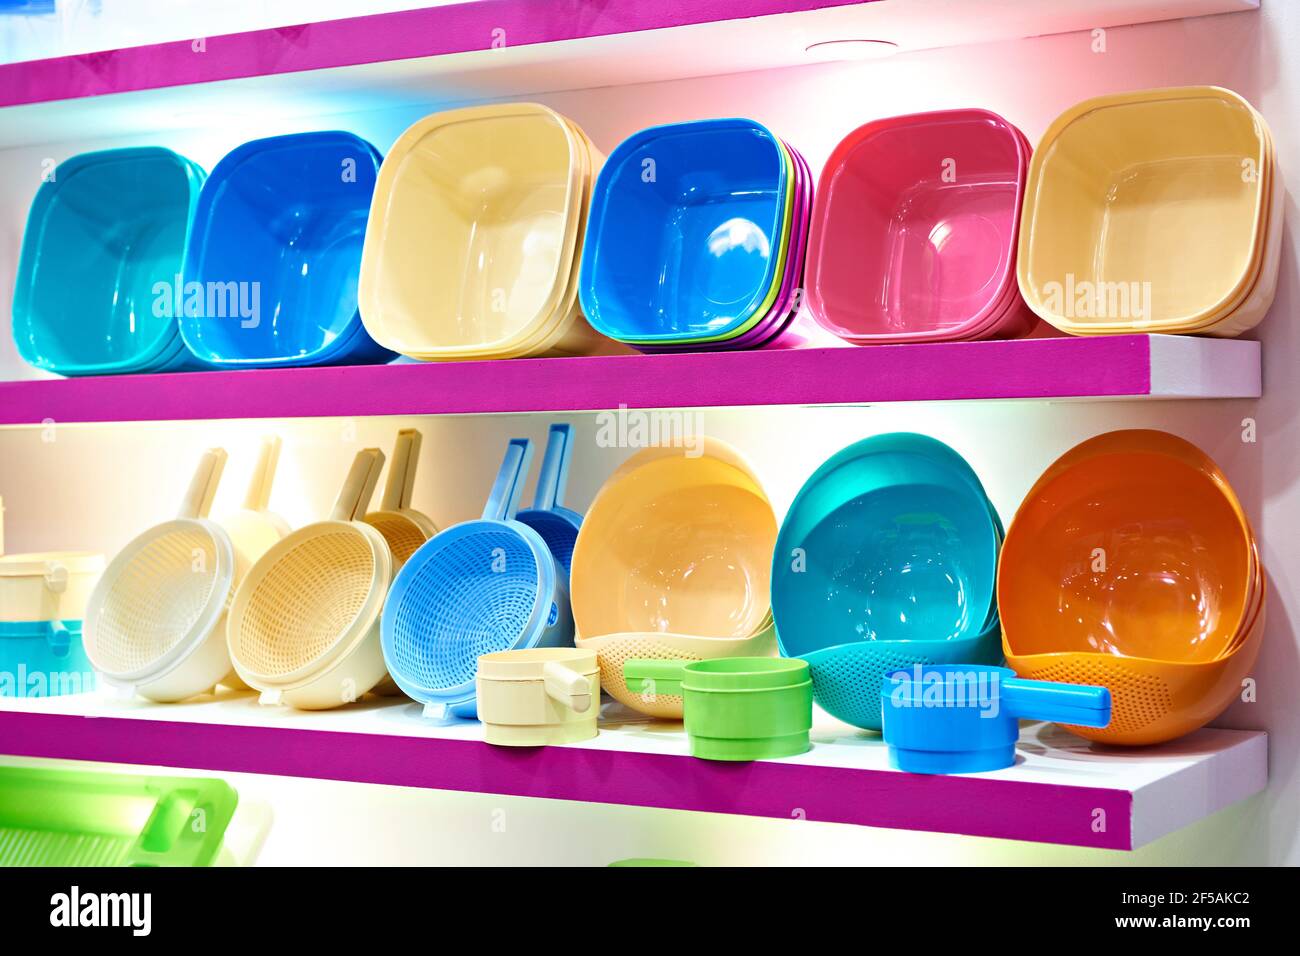 https://c8.alamy.com/comp/2F5AKC2/plastic-kitchenware-in-the-household-goods-store-2F5AKC2.jpg